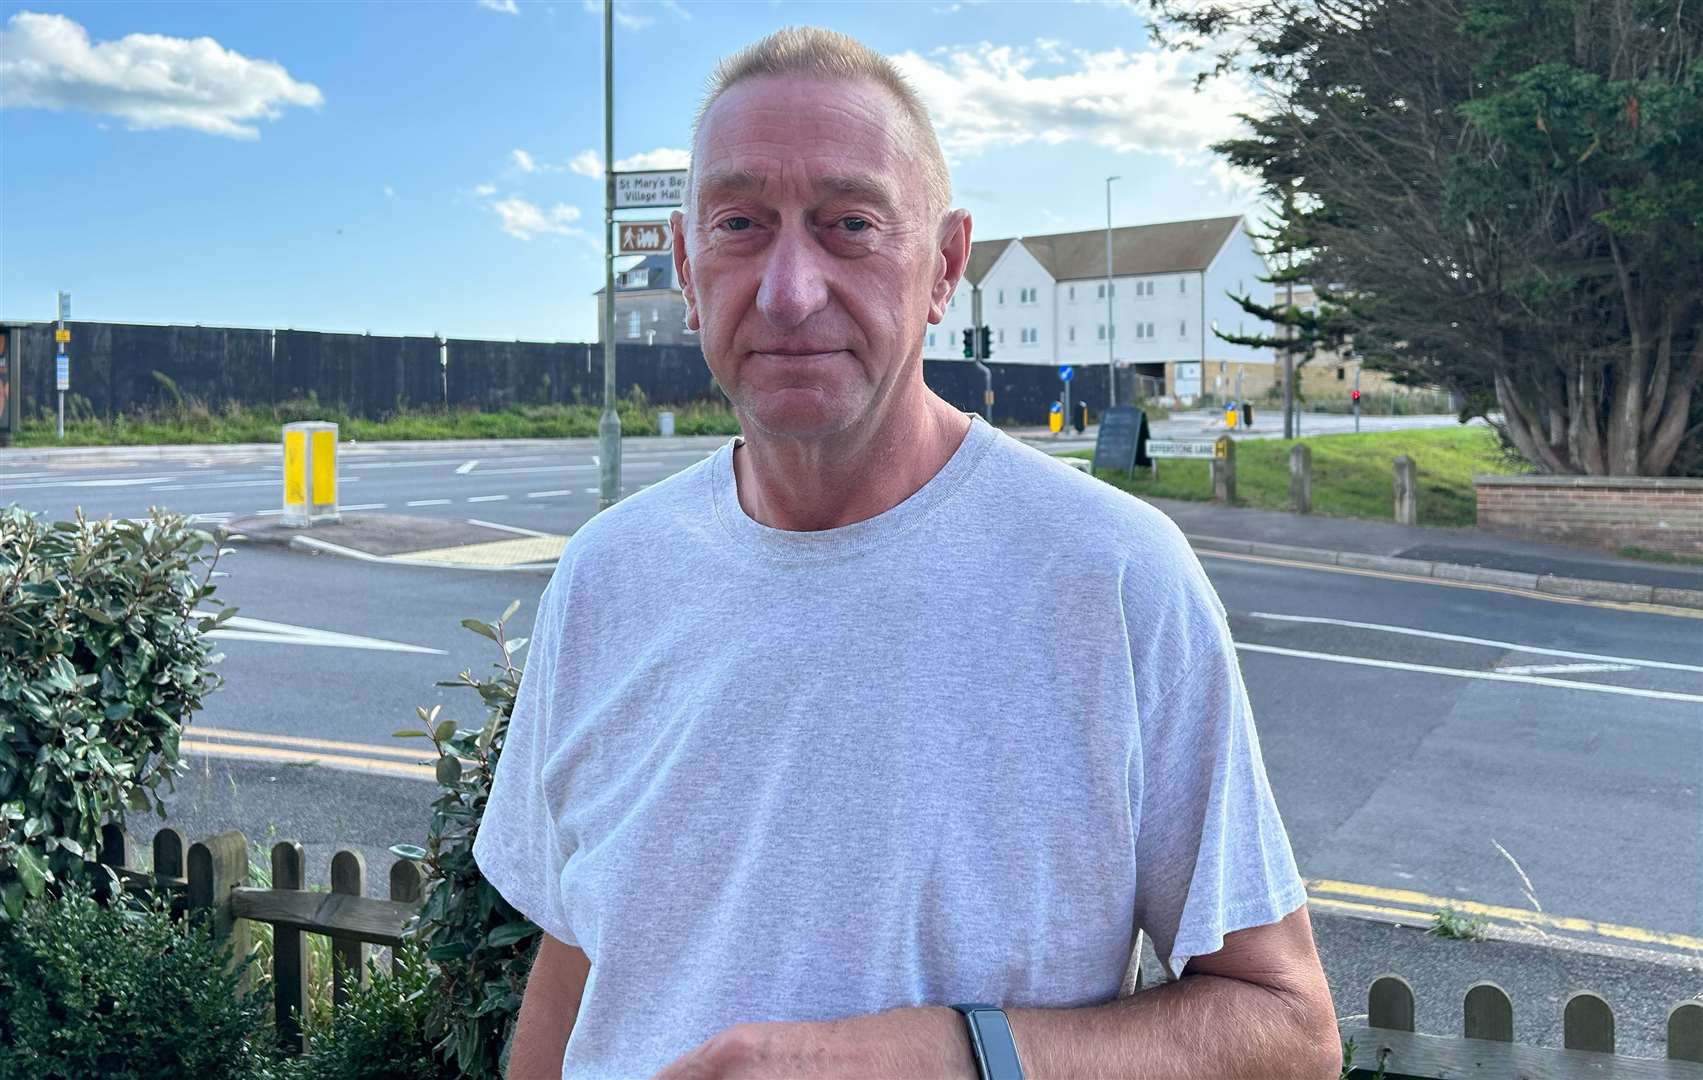 Mark Jones lives directly opposite the abandoned homes and is concerned about the fly-tipping he has seen